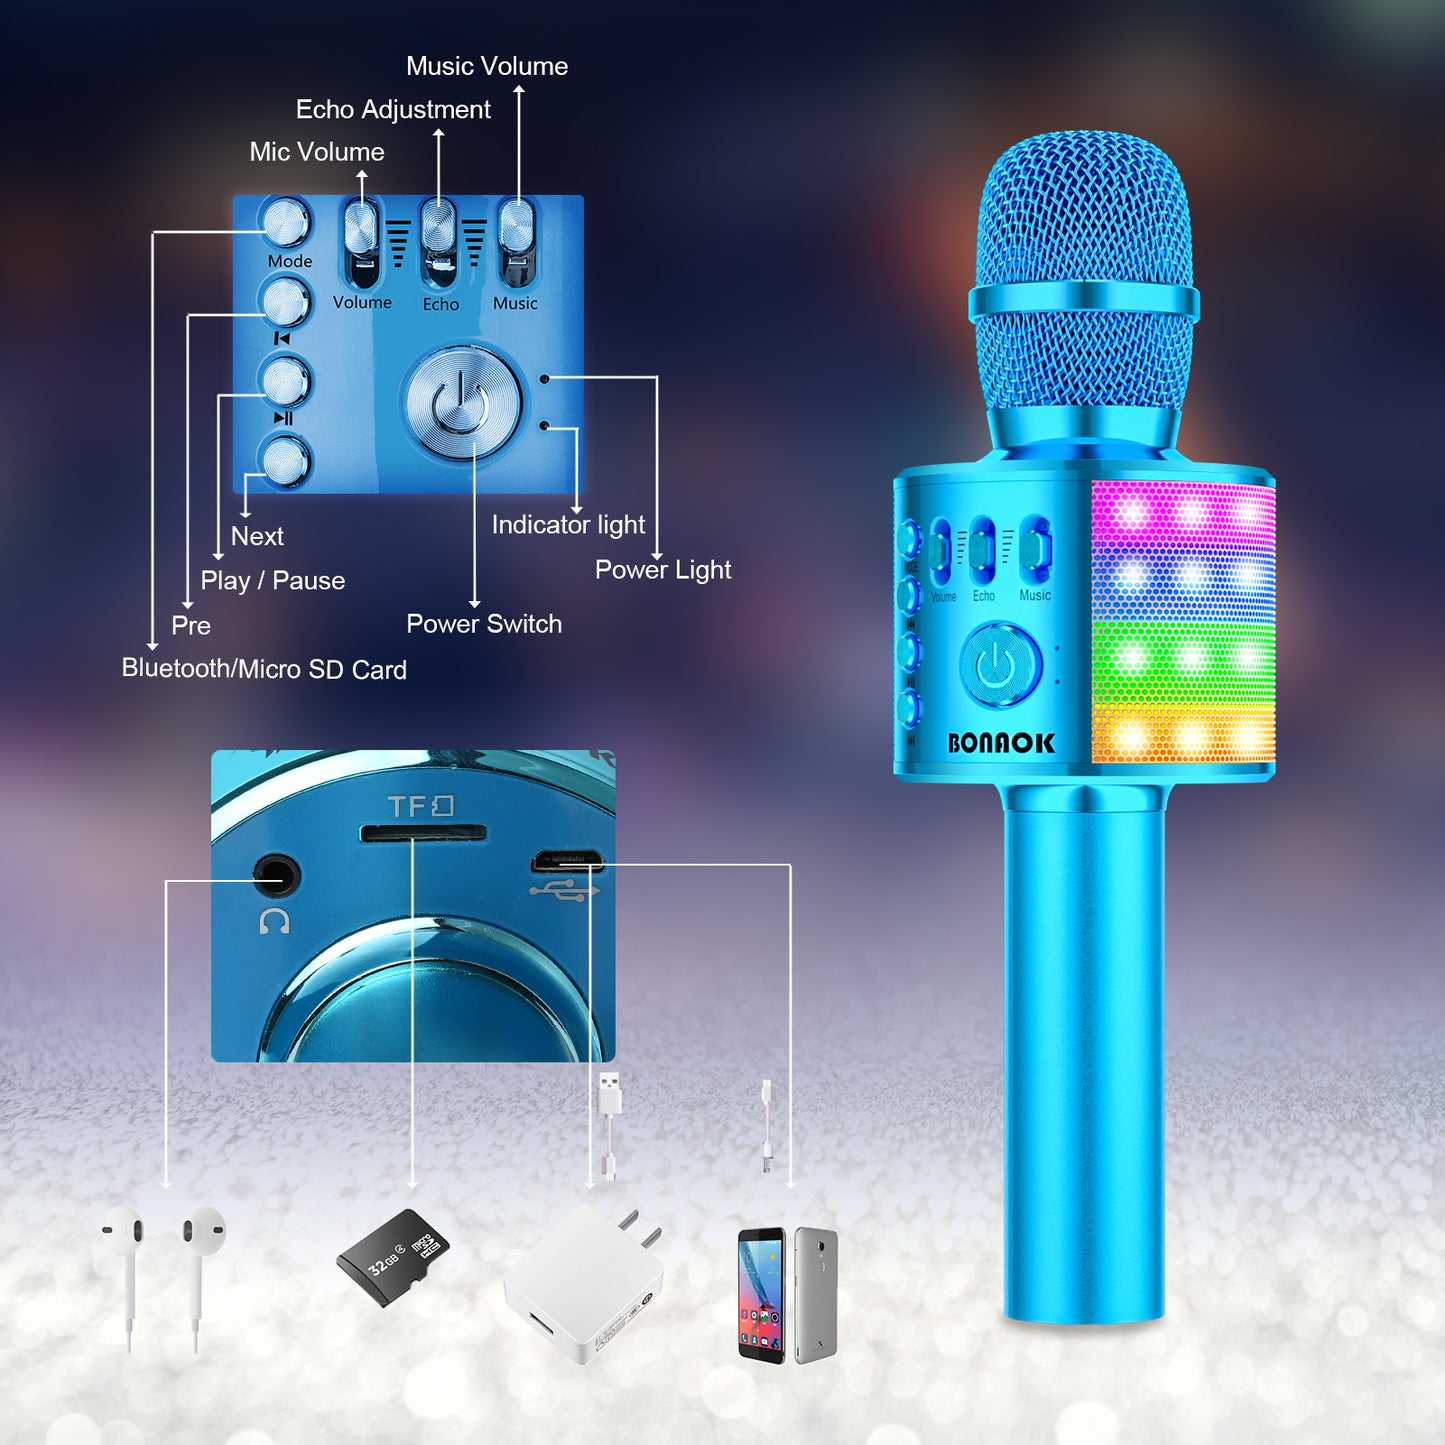 BONAOK Wireless Bluetooth Karaoke Microphone for Kids, Portable Handheld Singing Mic Speaker MP3 Player with Controllable LED Lights, Party for Adults Girls Boys Teens Q37L (Blue)